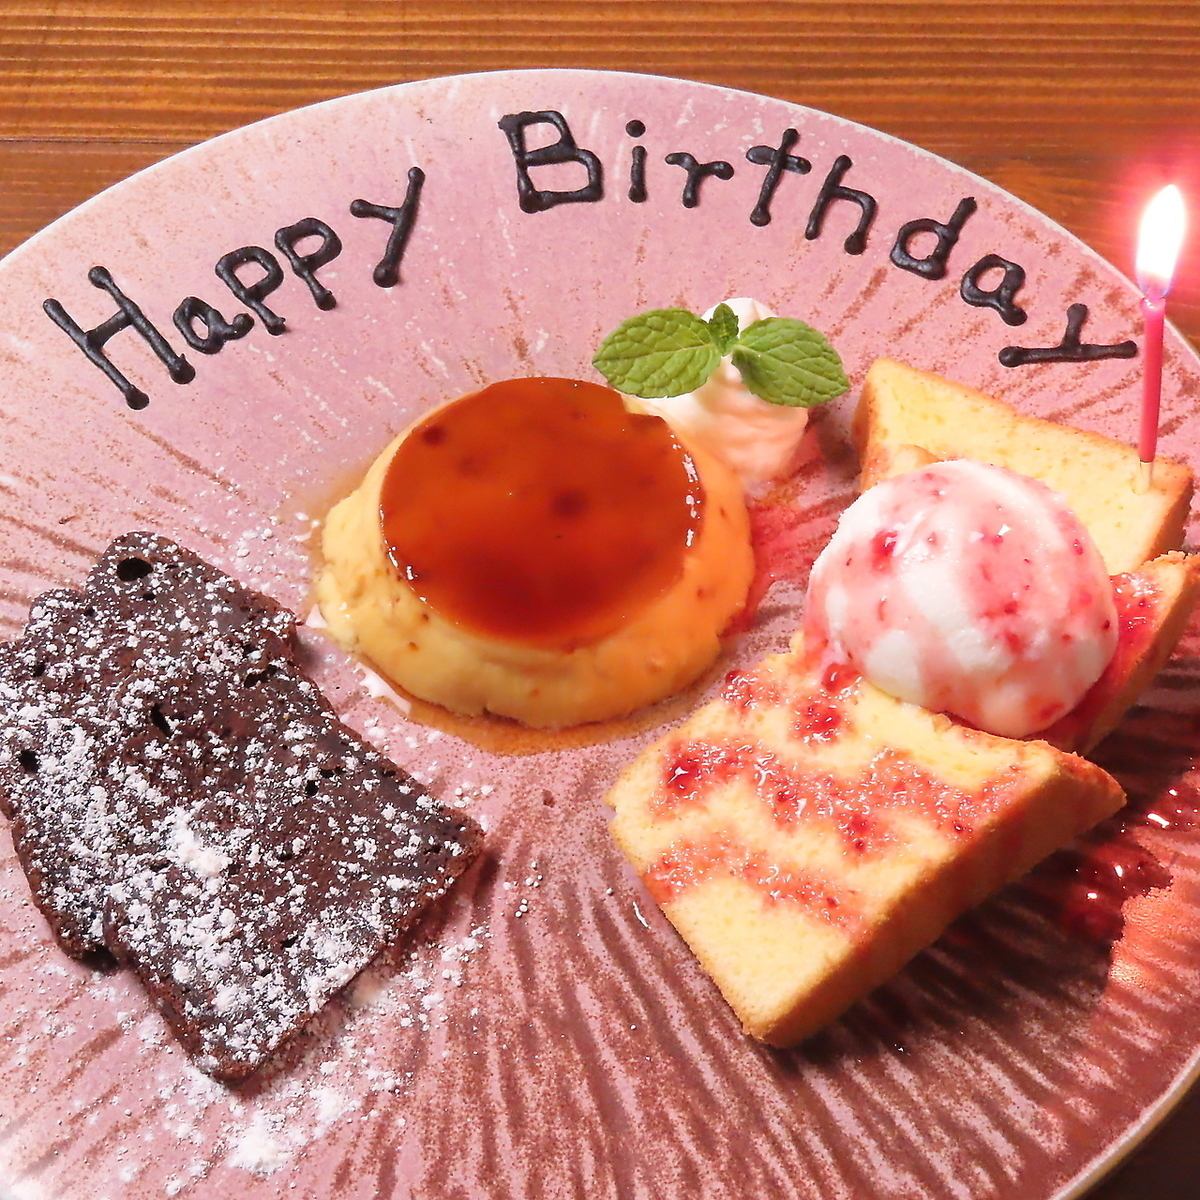 If you make a reservation in advance, we will prepare a message plate♪